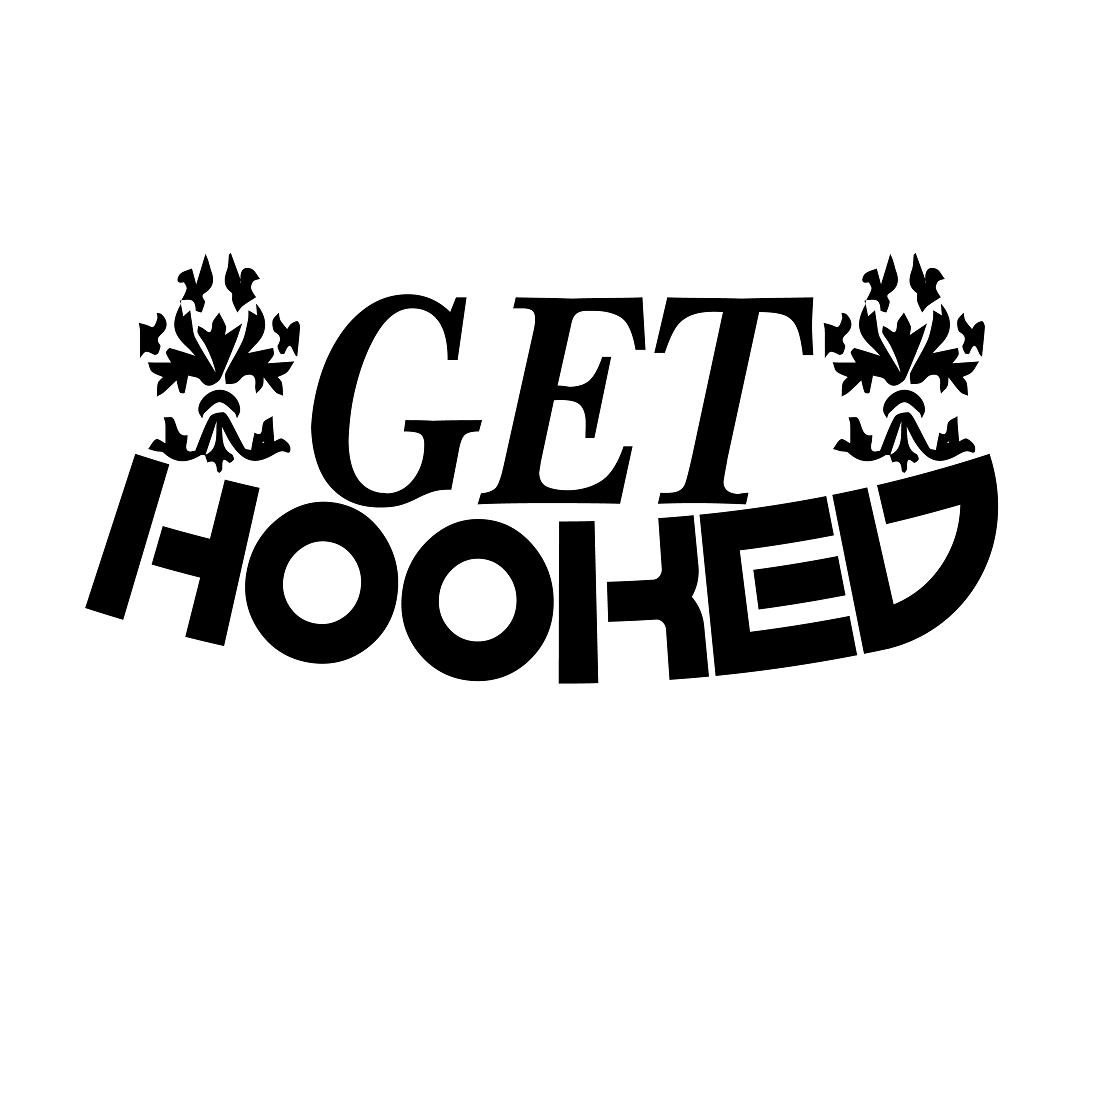 Get hooked preview image.